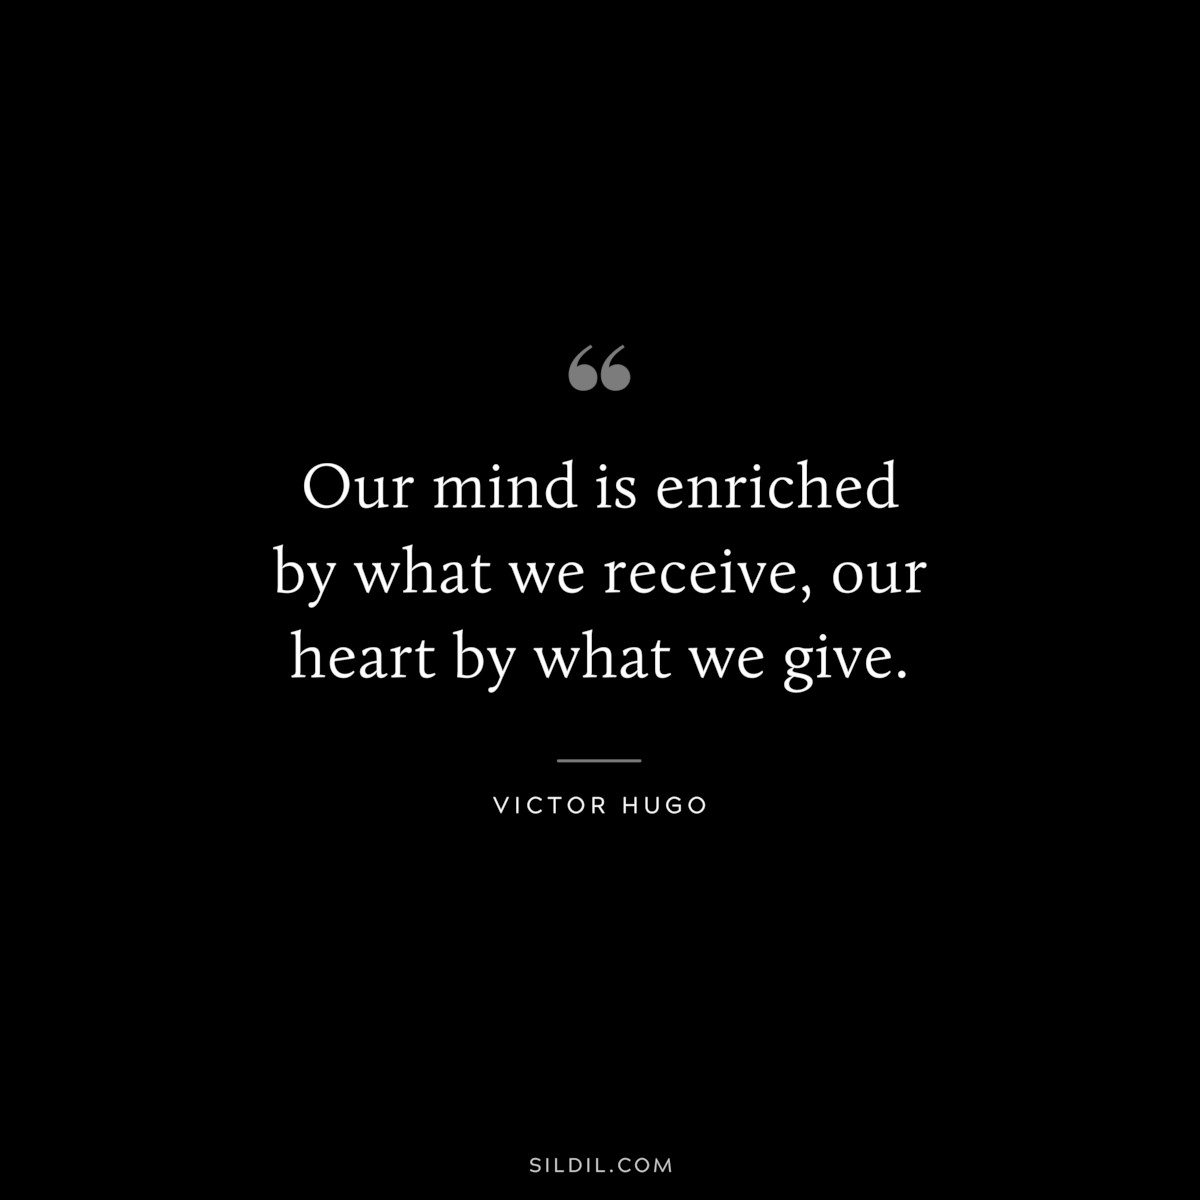 Our mind is enriched by what we receive, our heart by what we give.― Victor Hugo